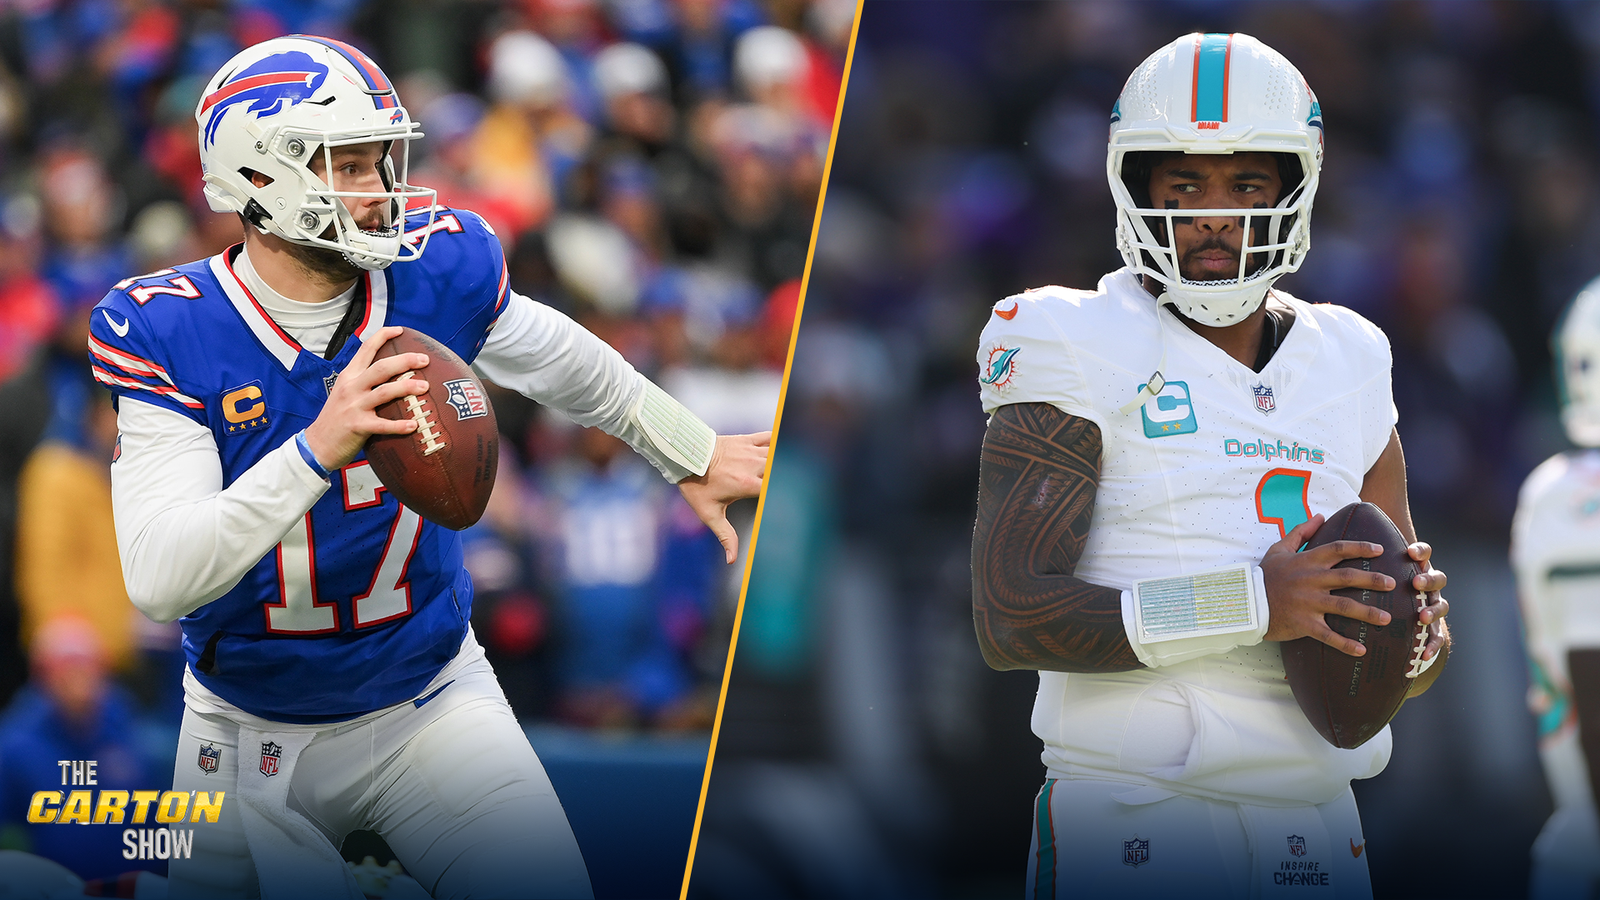 Craig calls it: Bills will beat Dolphins for AFC East crown